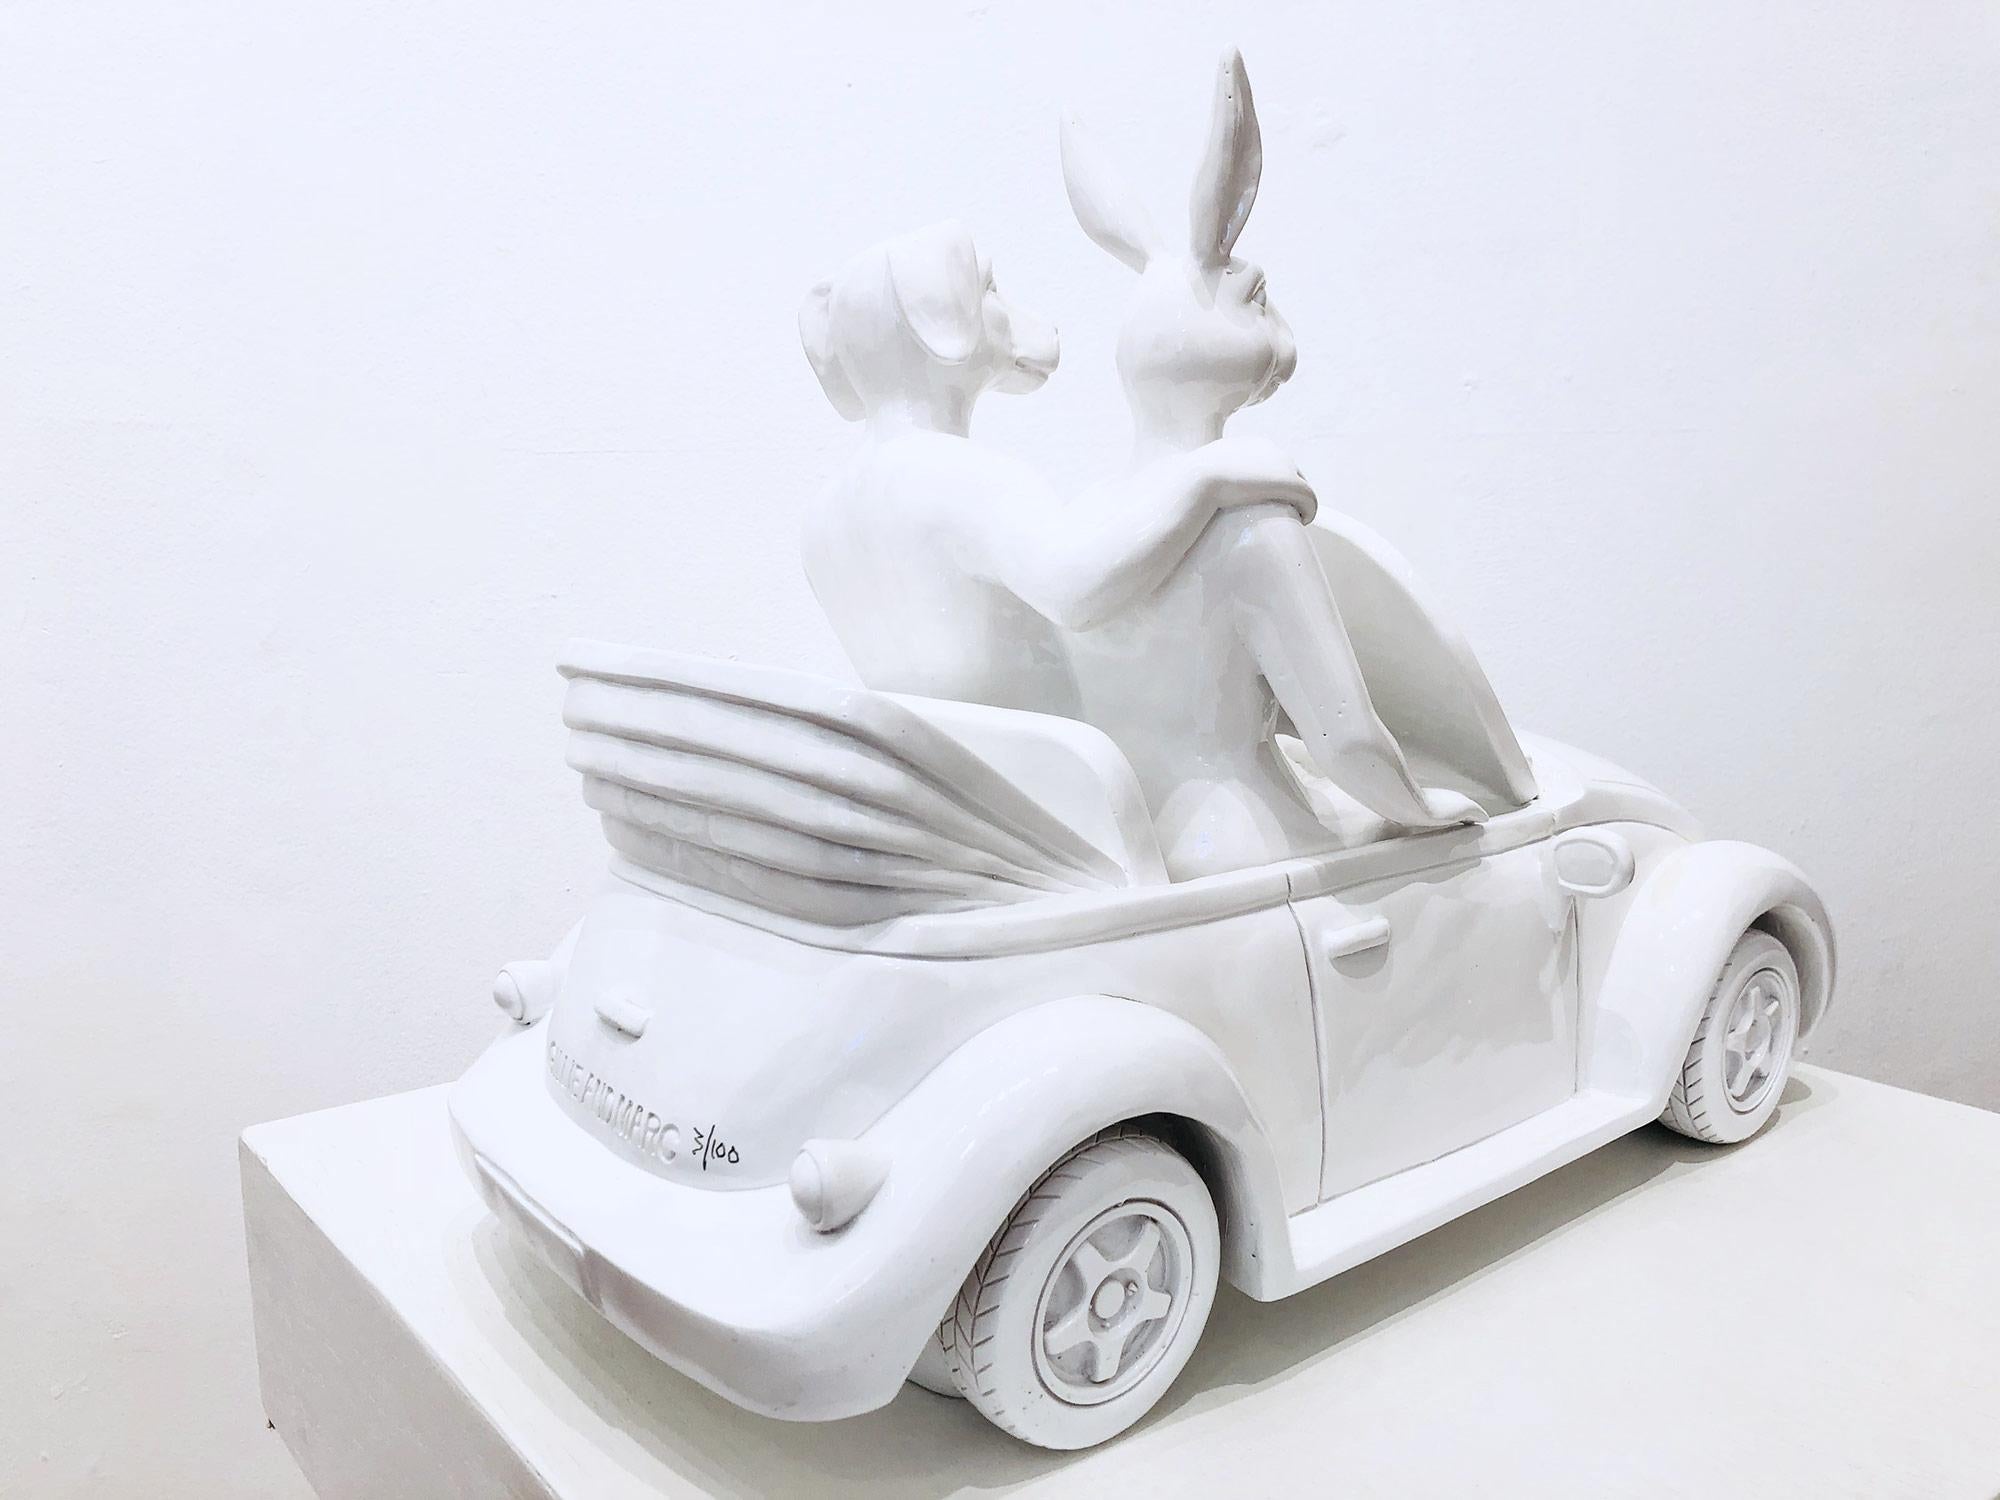 A whimsical yet very strong piece depicting the two figures from Gillie and Marc's iconic figures of the Dog/Bunny Human Hybrid, which has picked up much esteem across the globe. Here we find the figures embracing they ride in a Convertible Beetle.